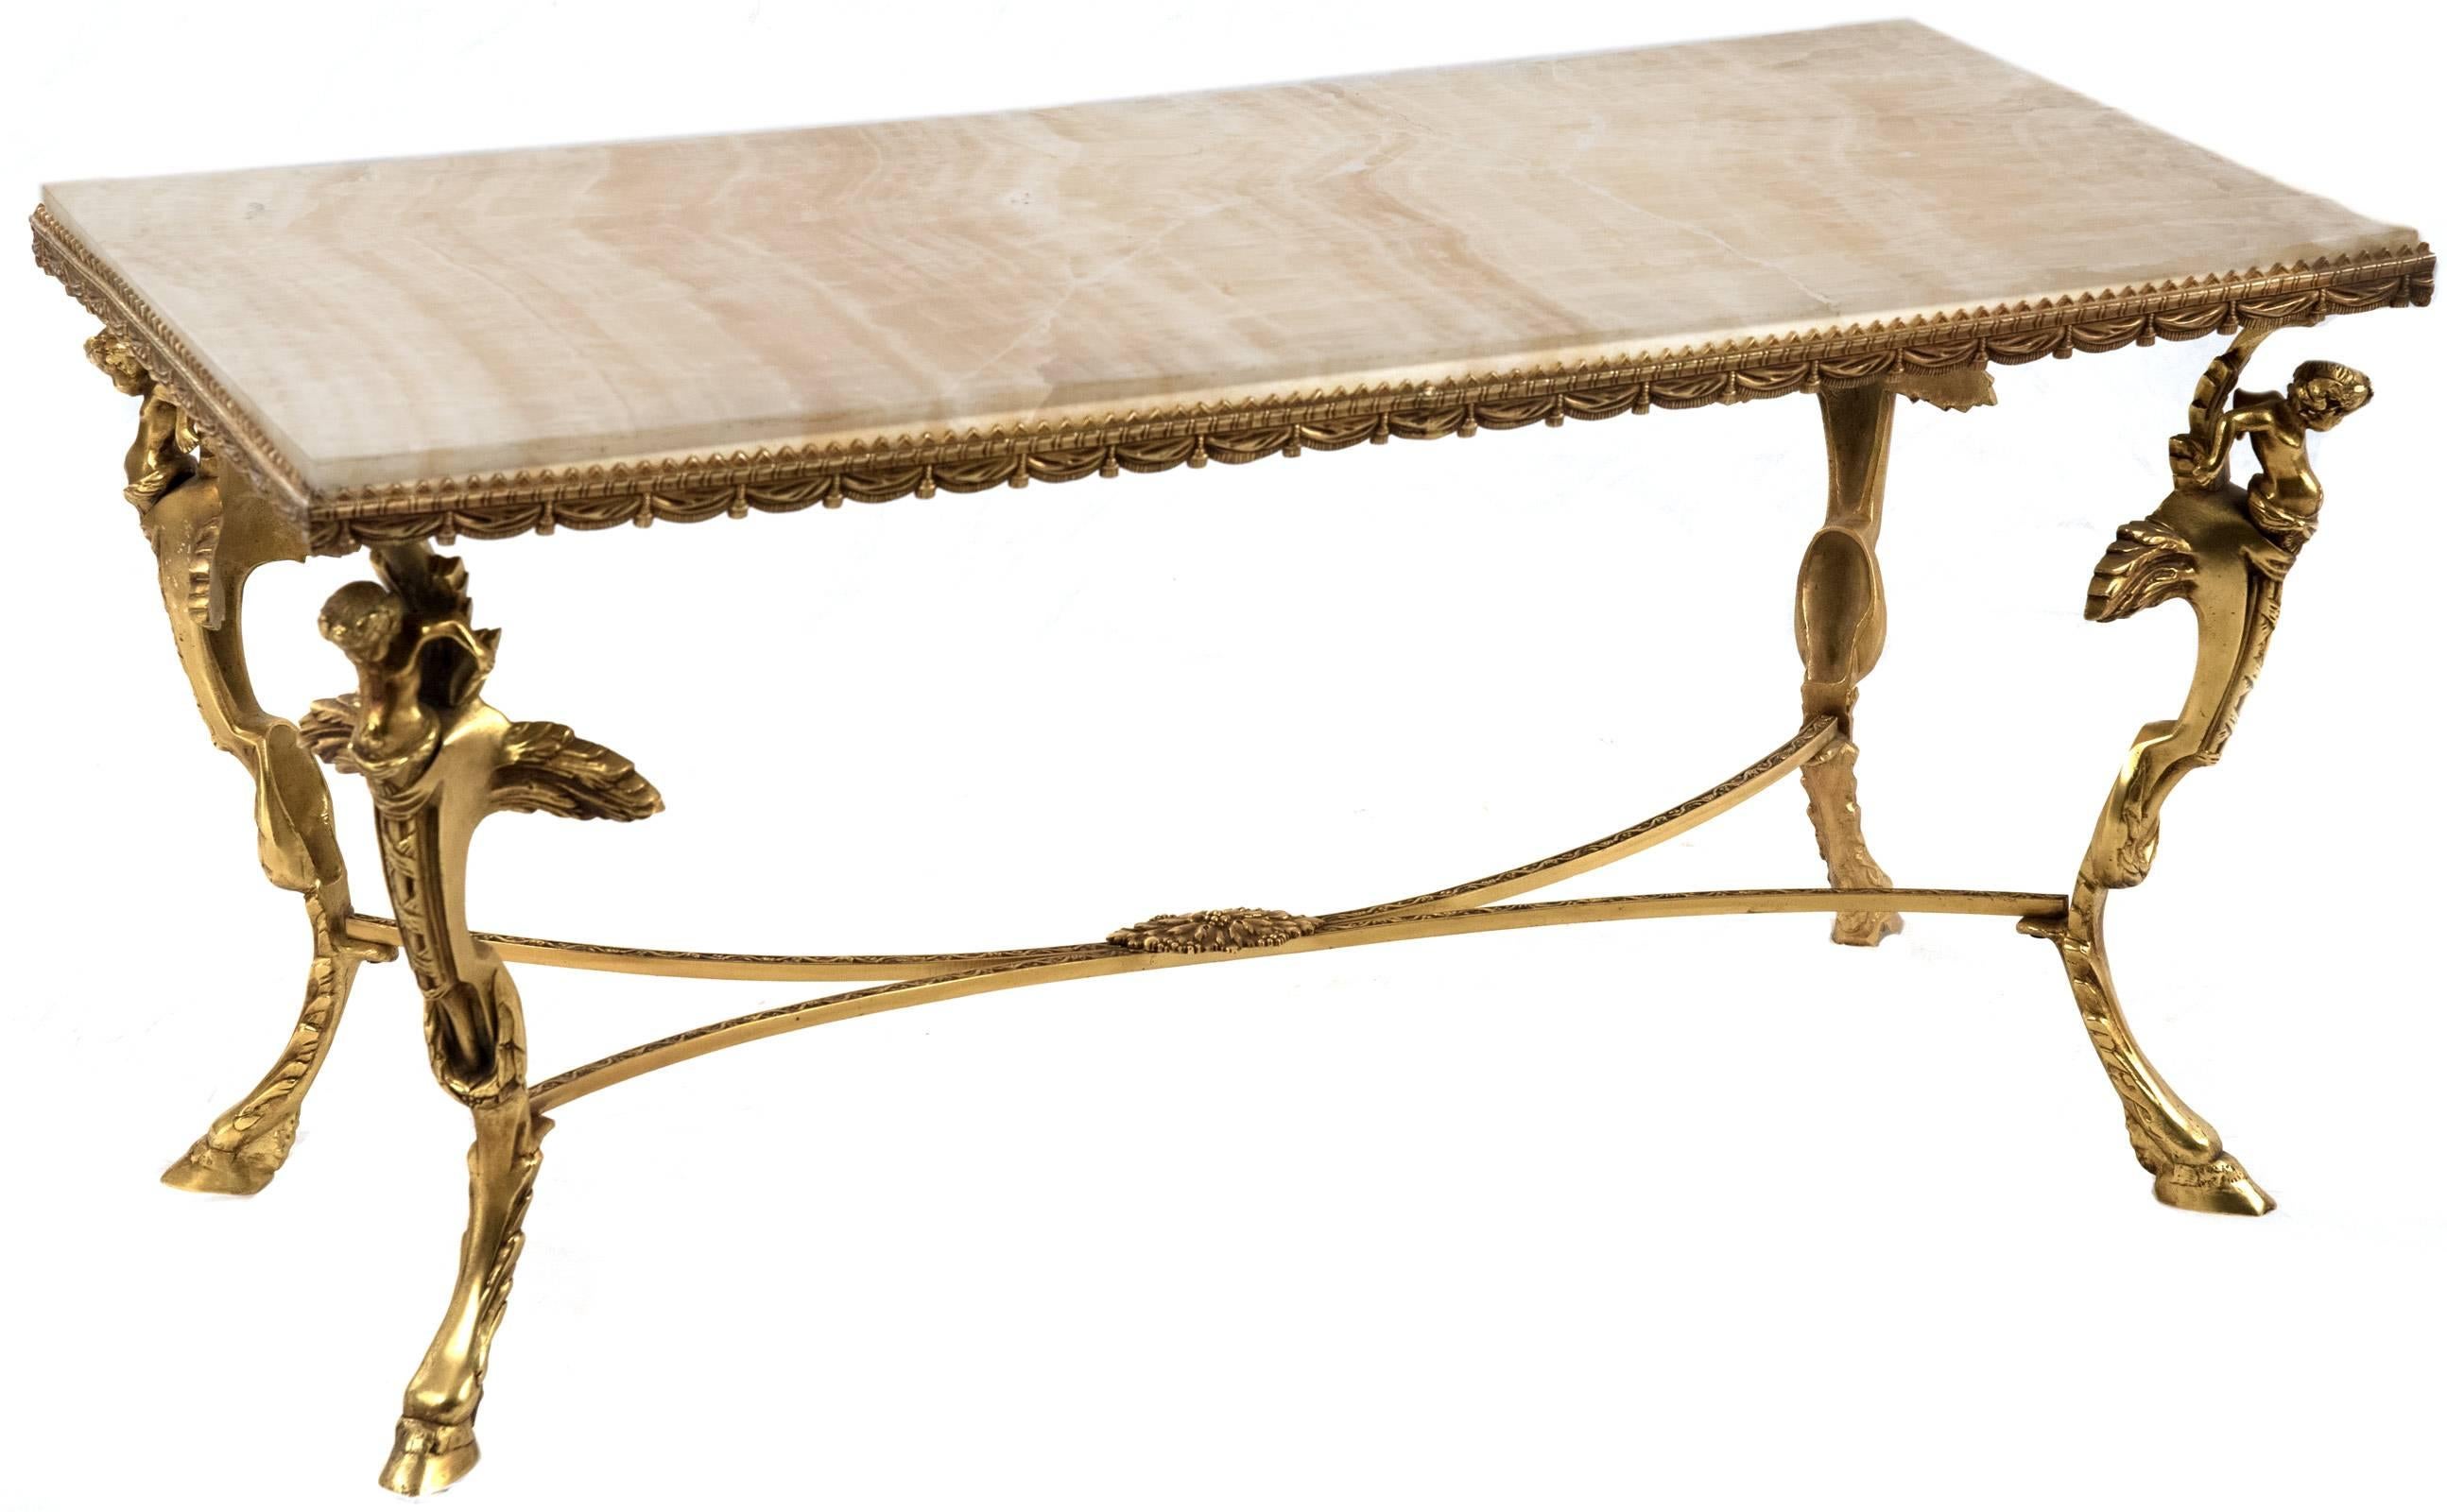 A marble and gilt neoclassical style coffee table with a veined marble top trimmed with stylized gilt fabric swaths raised on four legs with winged cherubs above a hoof foot, all joined by a rounded and incised X-frame stretcher with a central